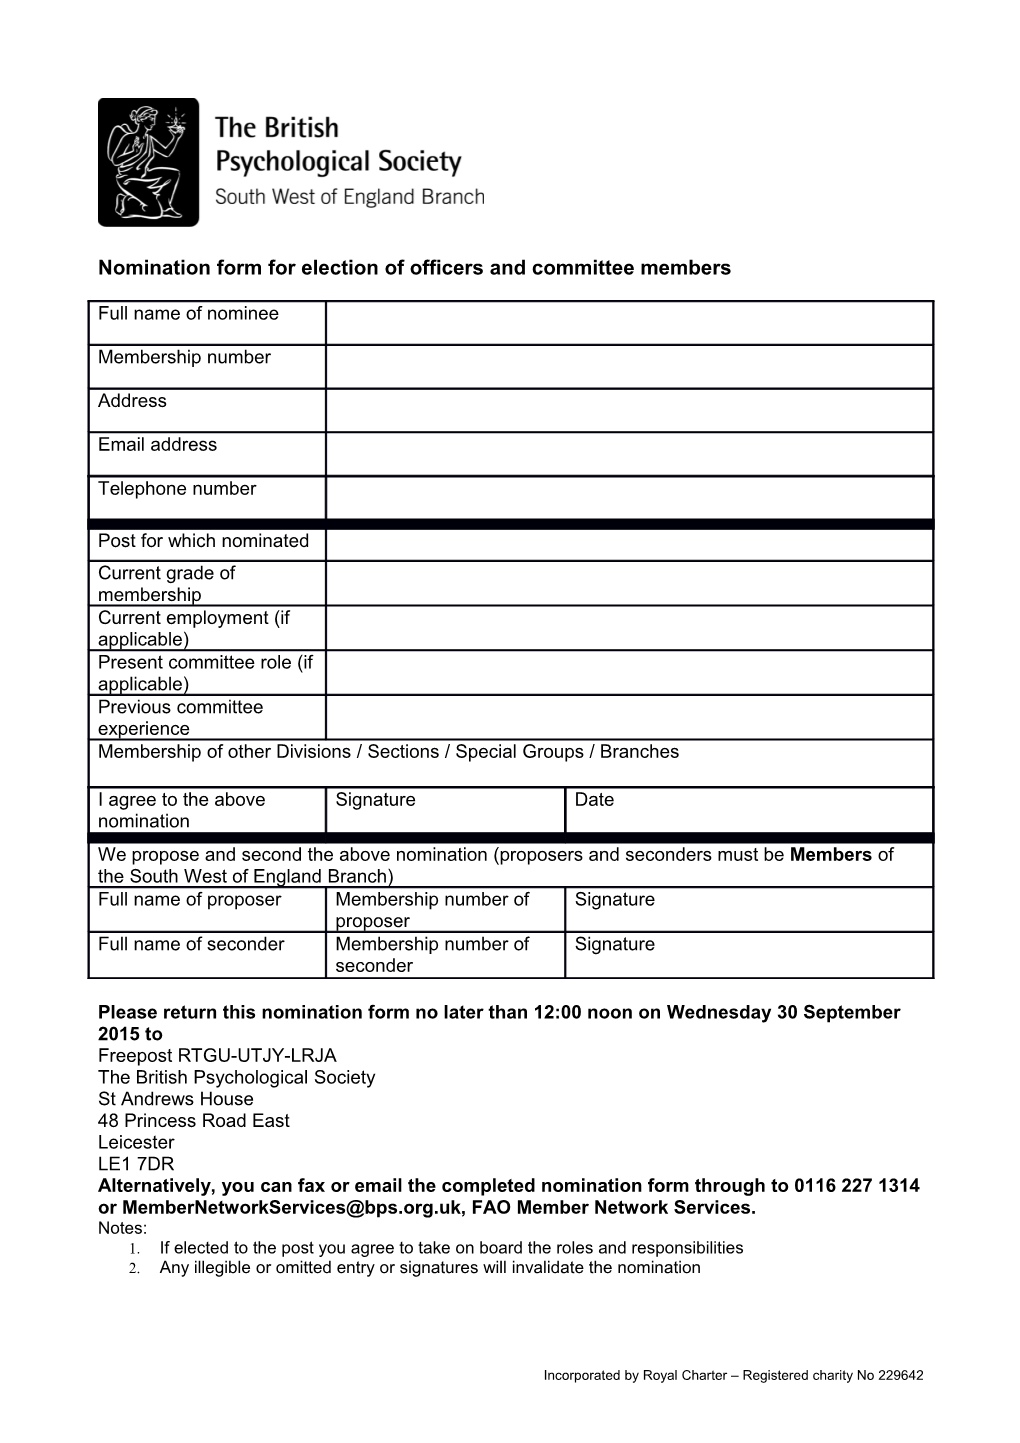 BPS South West Branch Nomination Form 2015